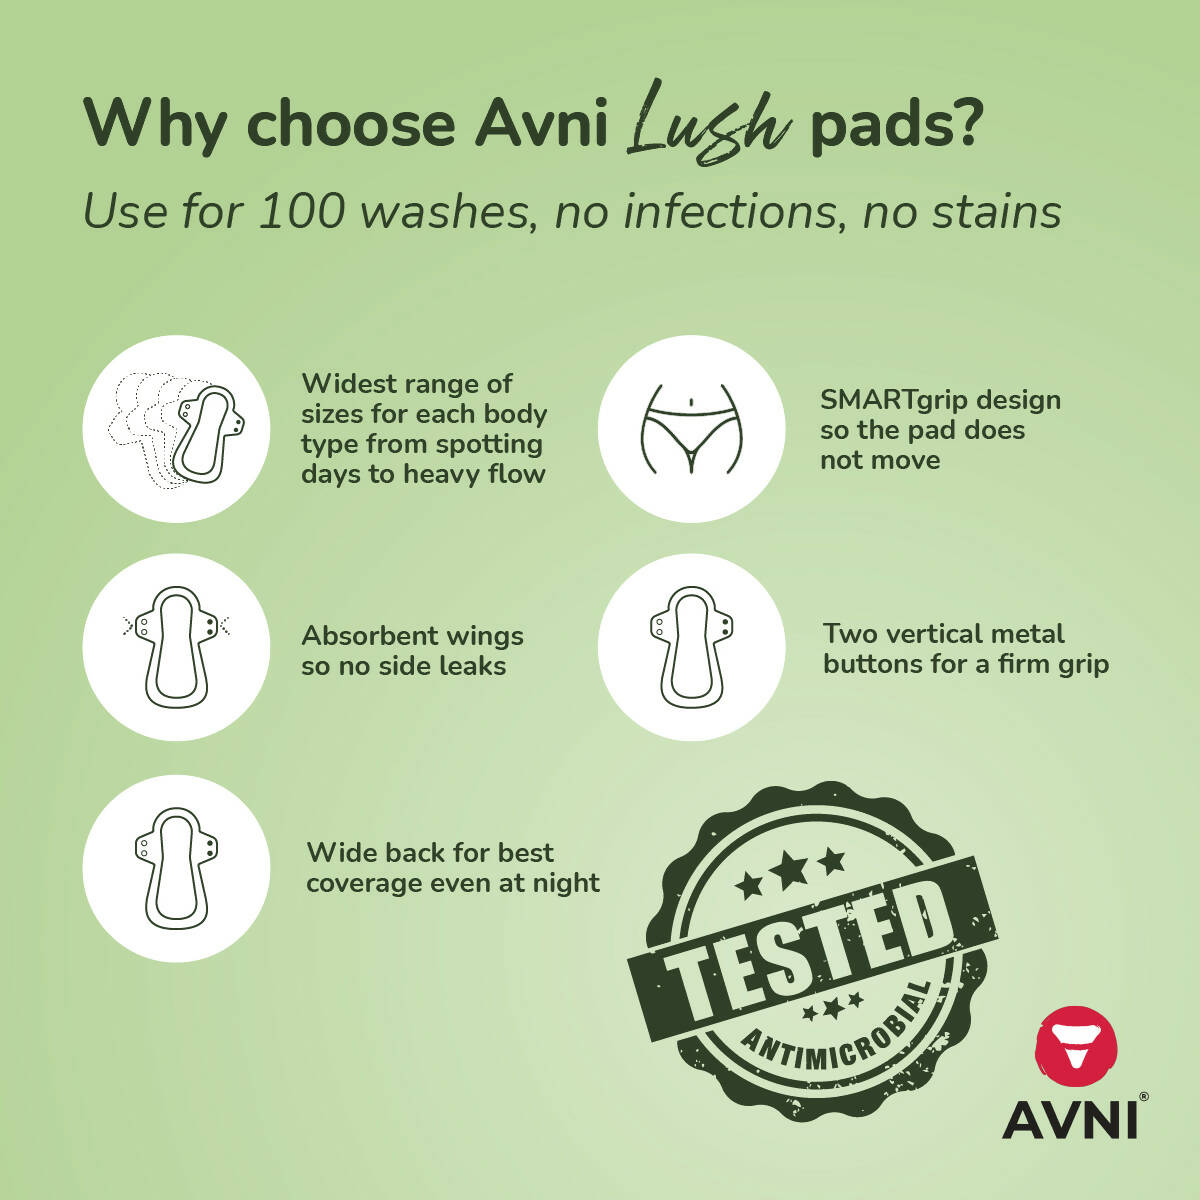 Avni Lush Certified 100% Organic Cotton Washable Cloth Pads, Regular Size (R-240MM, Pack of 2) | Antimicrobial Reusable Cloth Sanitary Pad | With Cloth Storage pouch Wemy Store